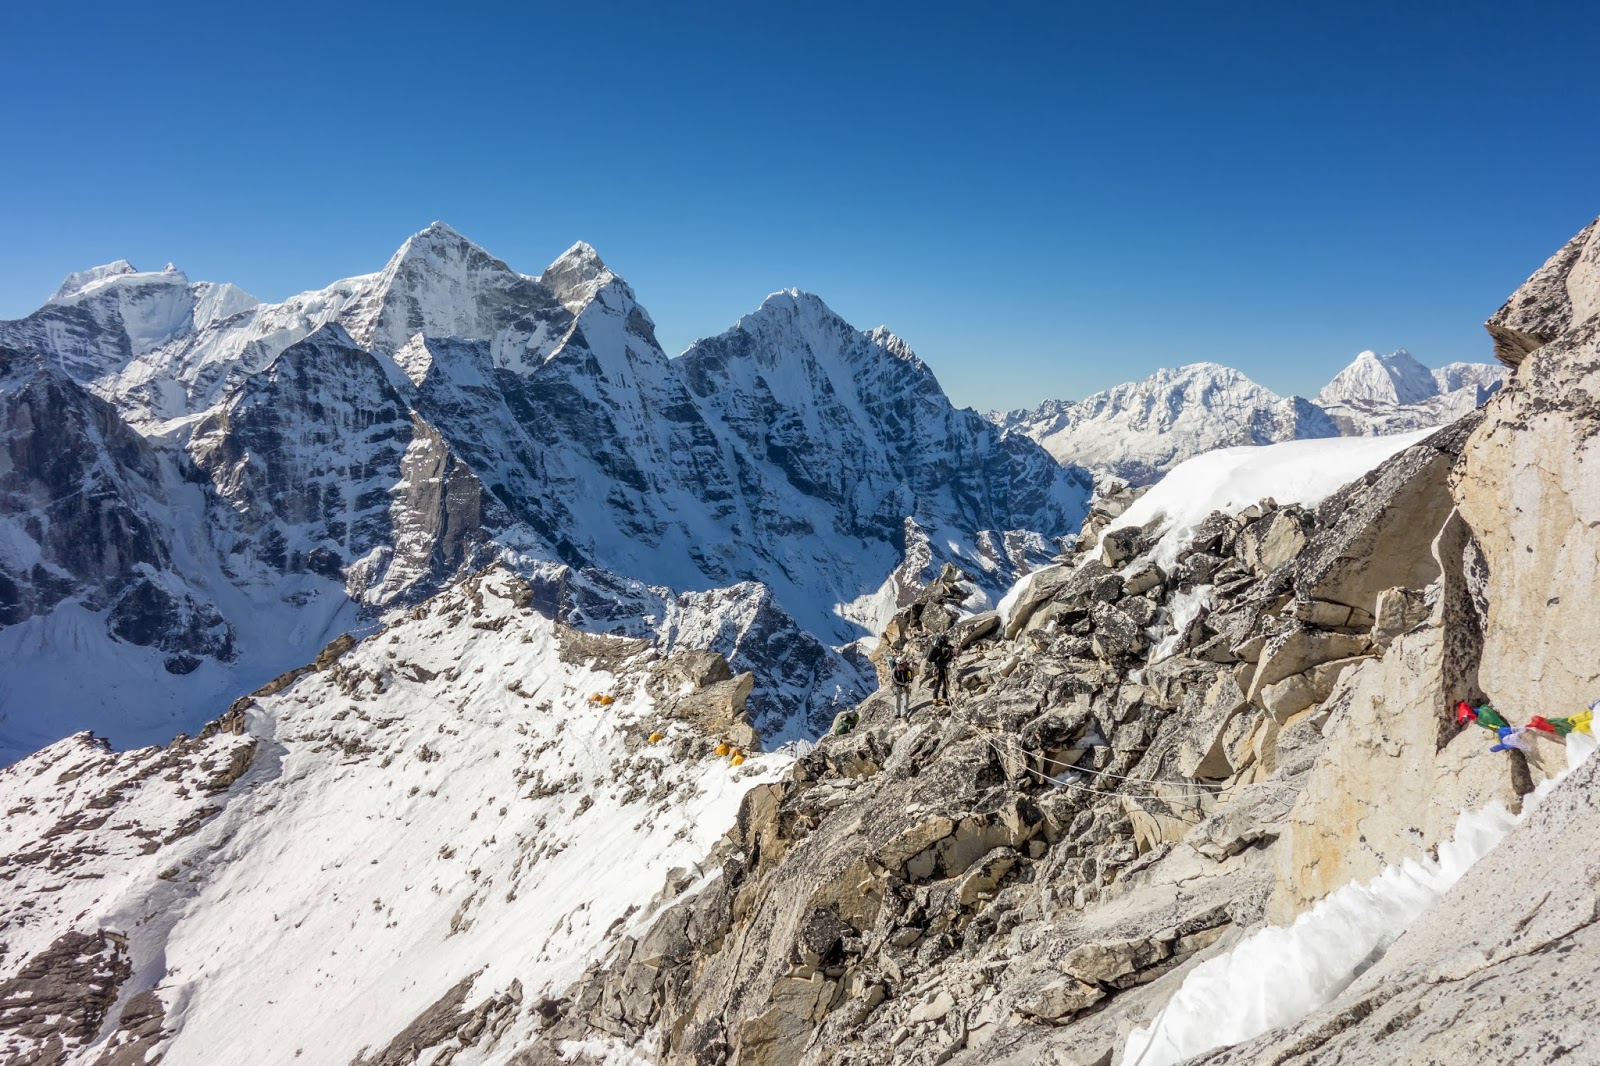 Route between Camp 1 and Camp 2 on Ama Dablam